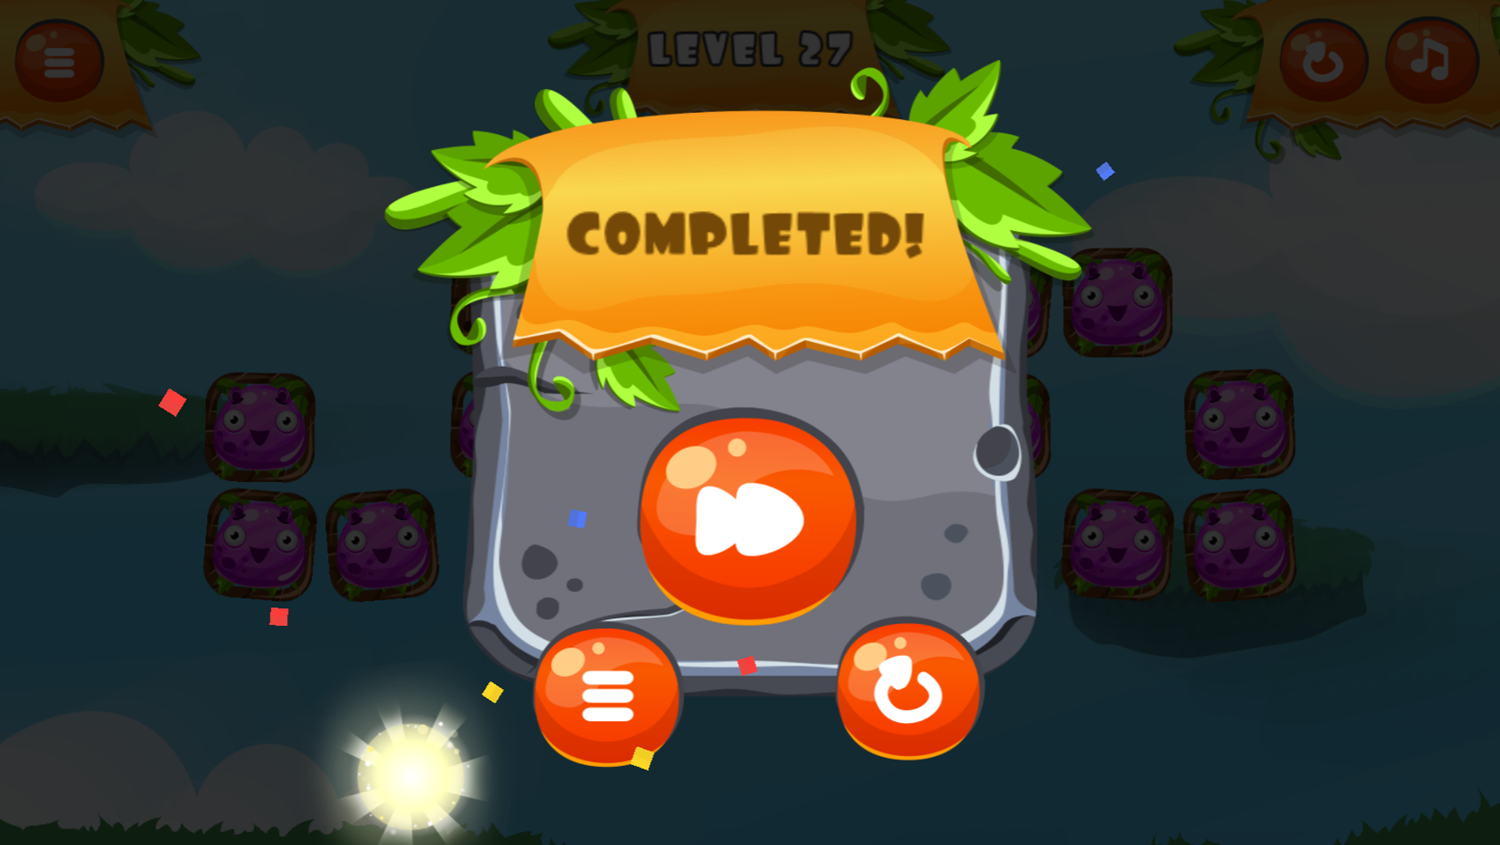 Happy Monsters Game Completed Screenshot.